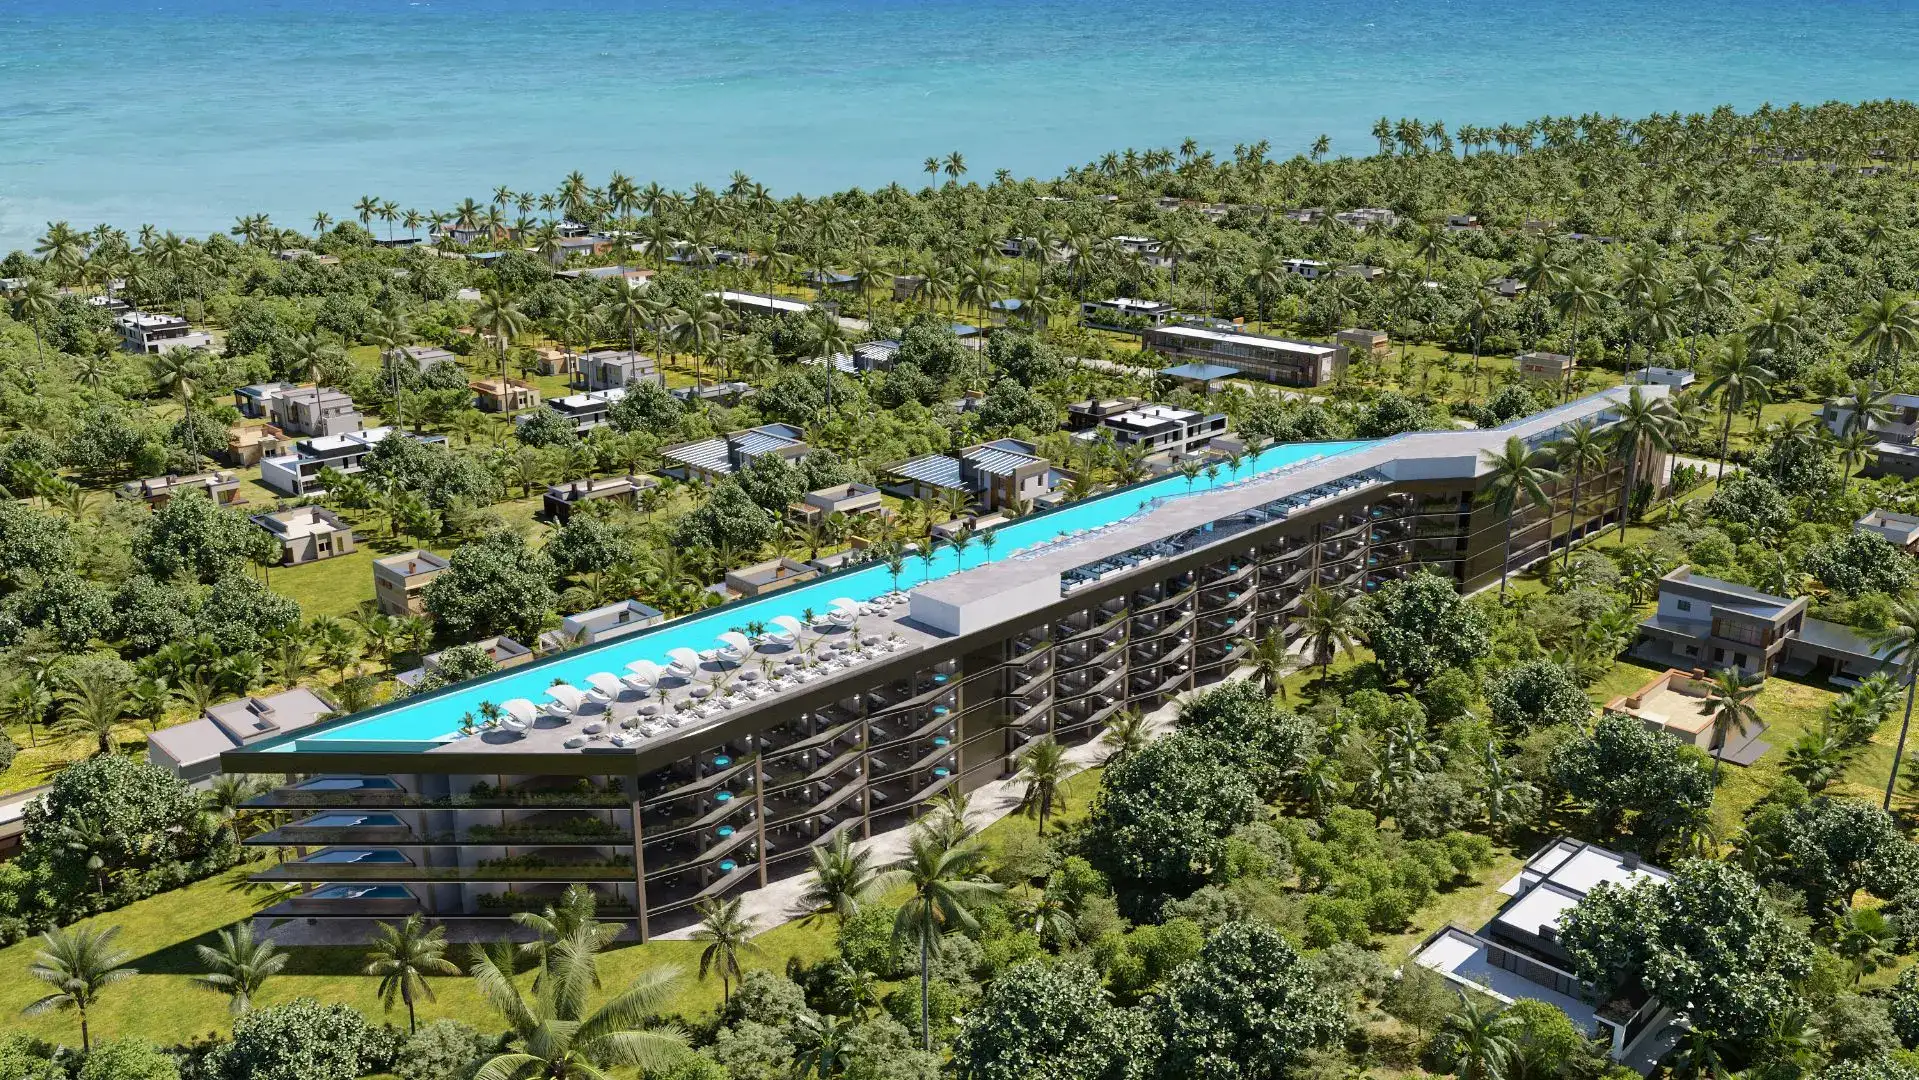 RESIDENTIAL COMPLEX WITH THE WORLD'S LARGEST ROOF POOL IN BALI